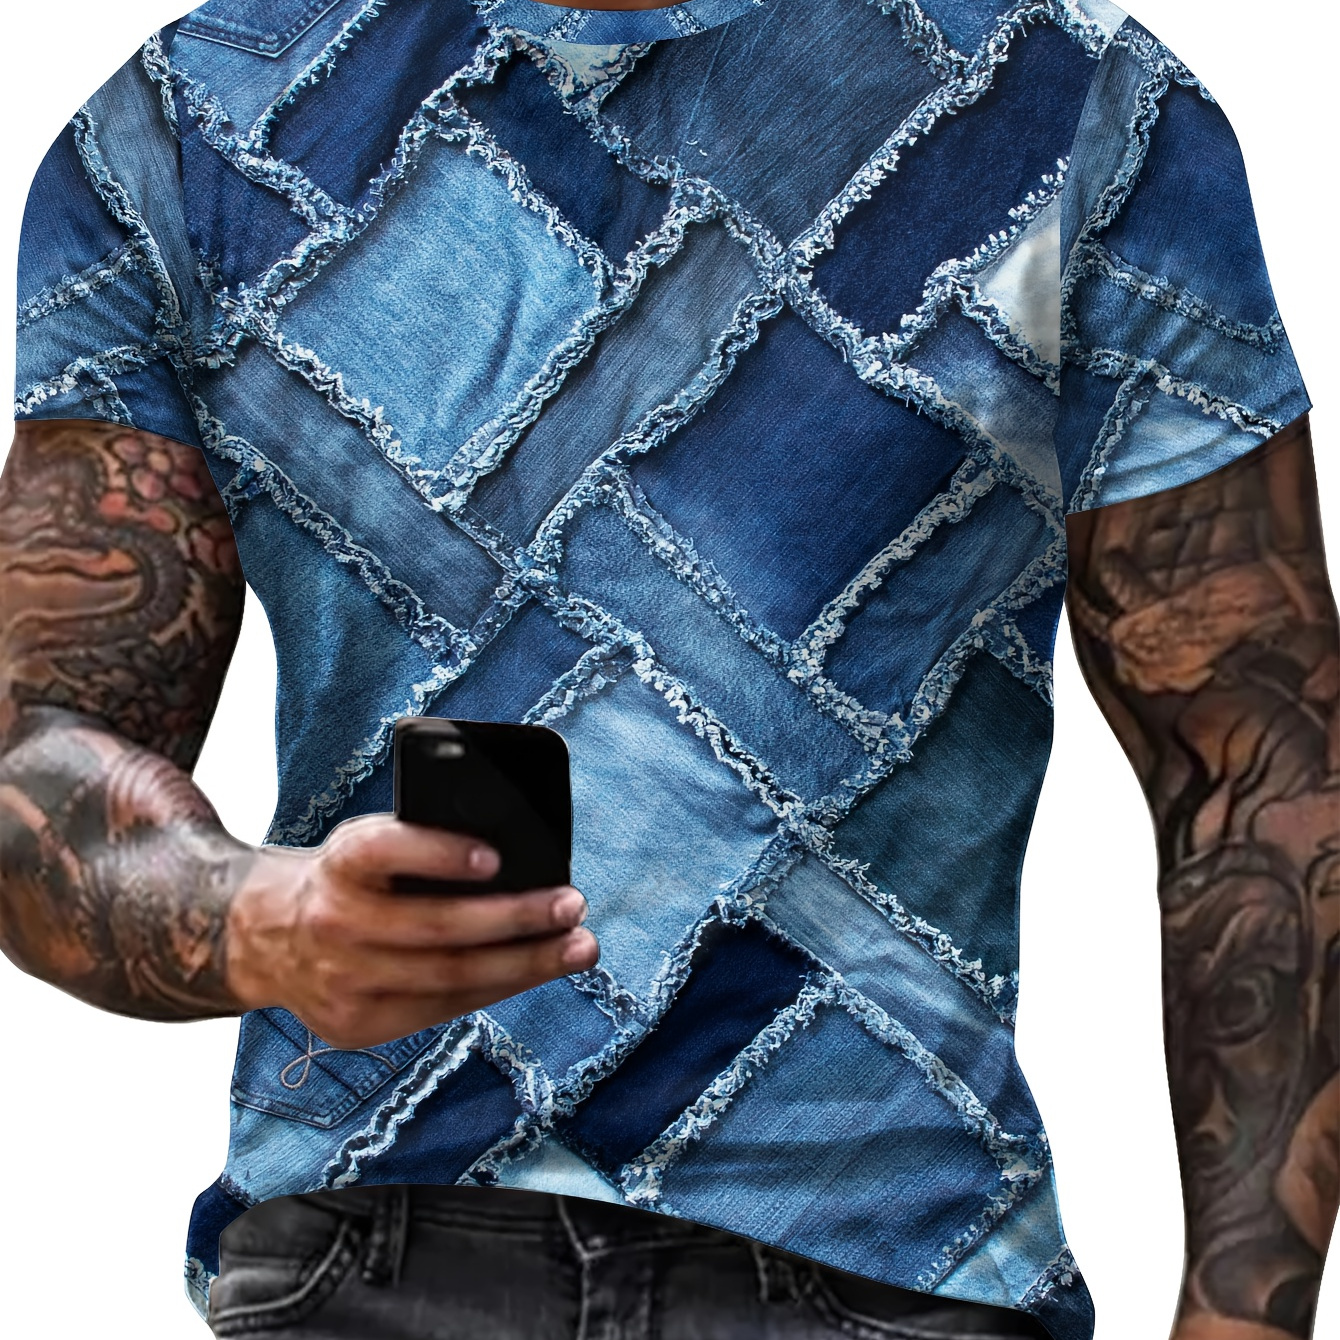 

3d Denim Patchwork Pieces Like Pattern T-shirt With Crew Neck And Short Sleeve, Novel And Fashionable Tops For Men's Summer Leisurewear And Outdoors Activities